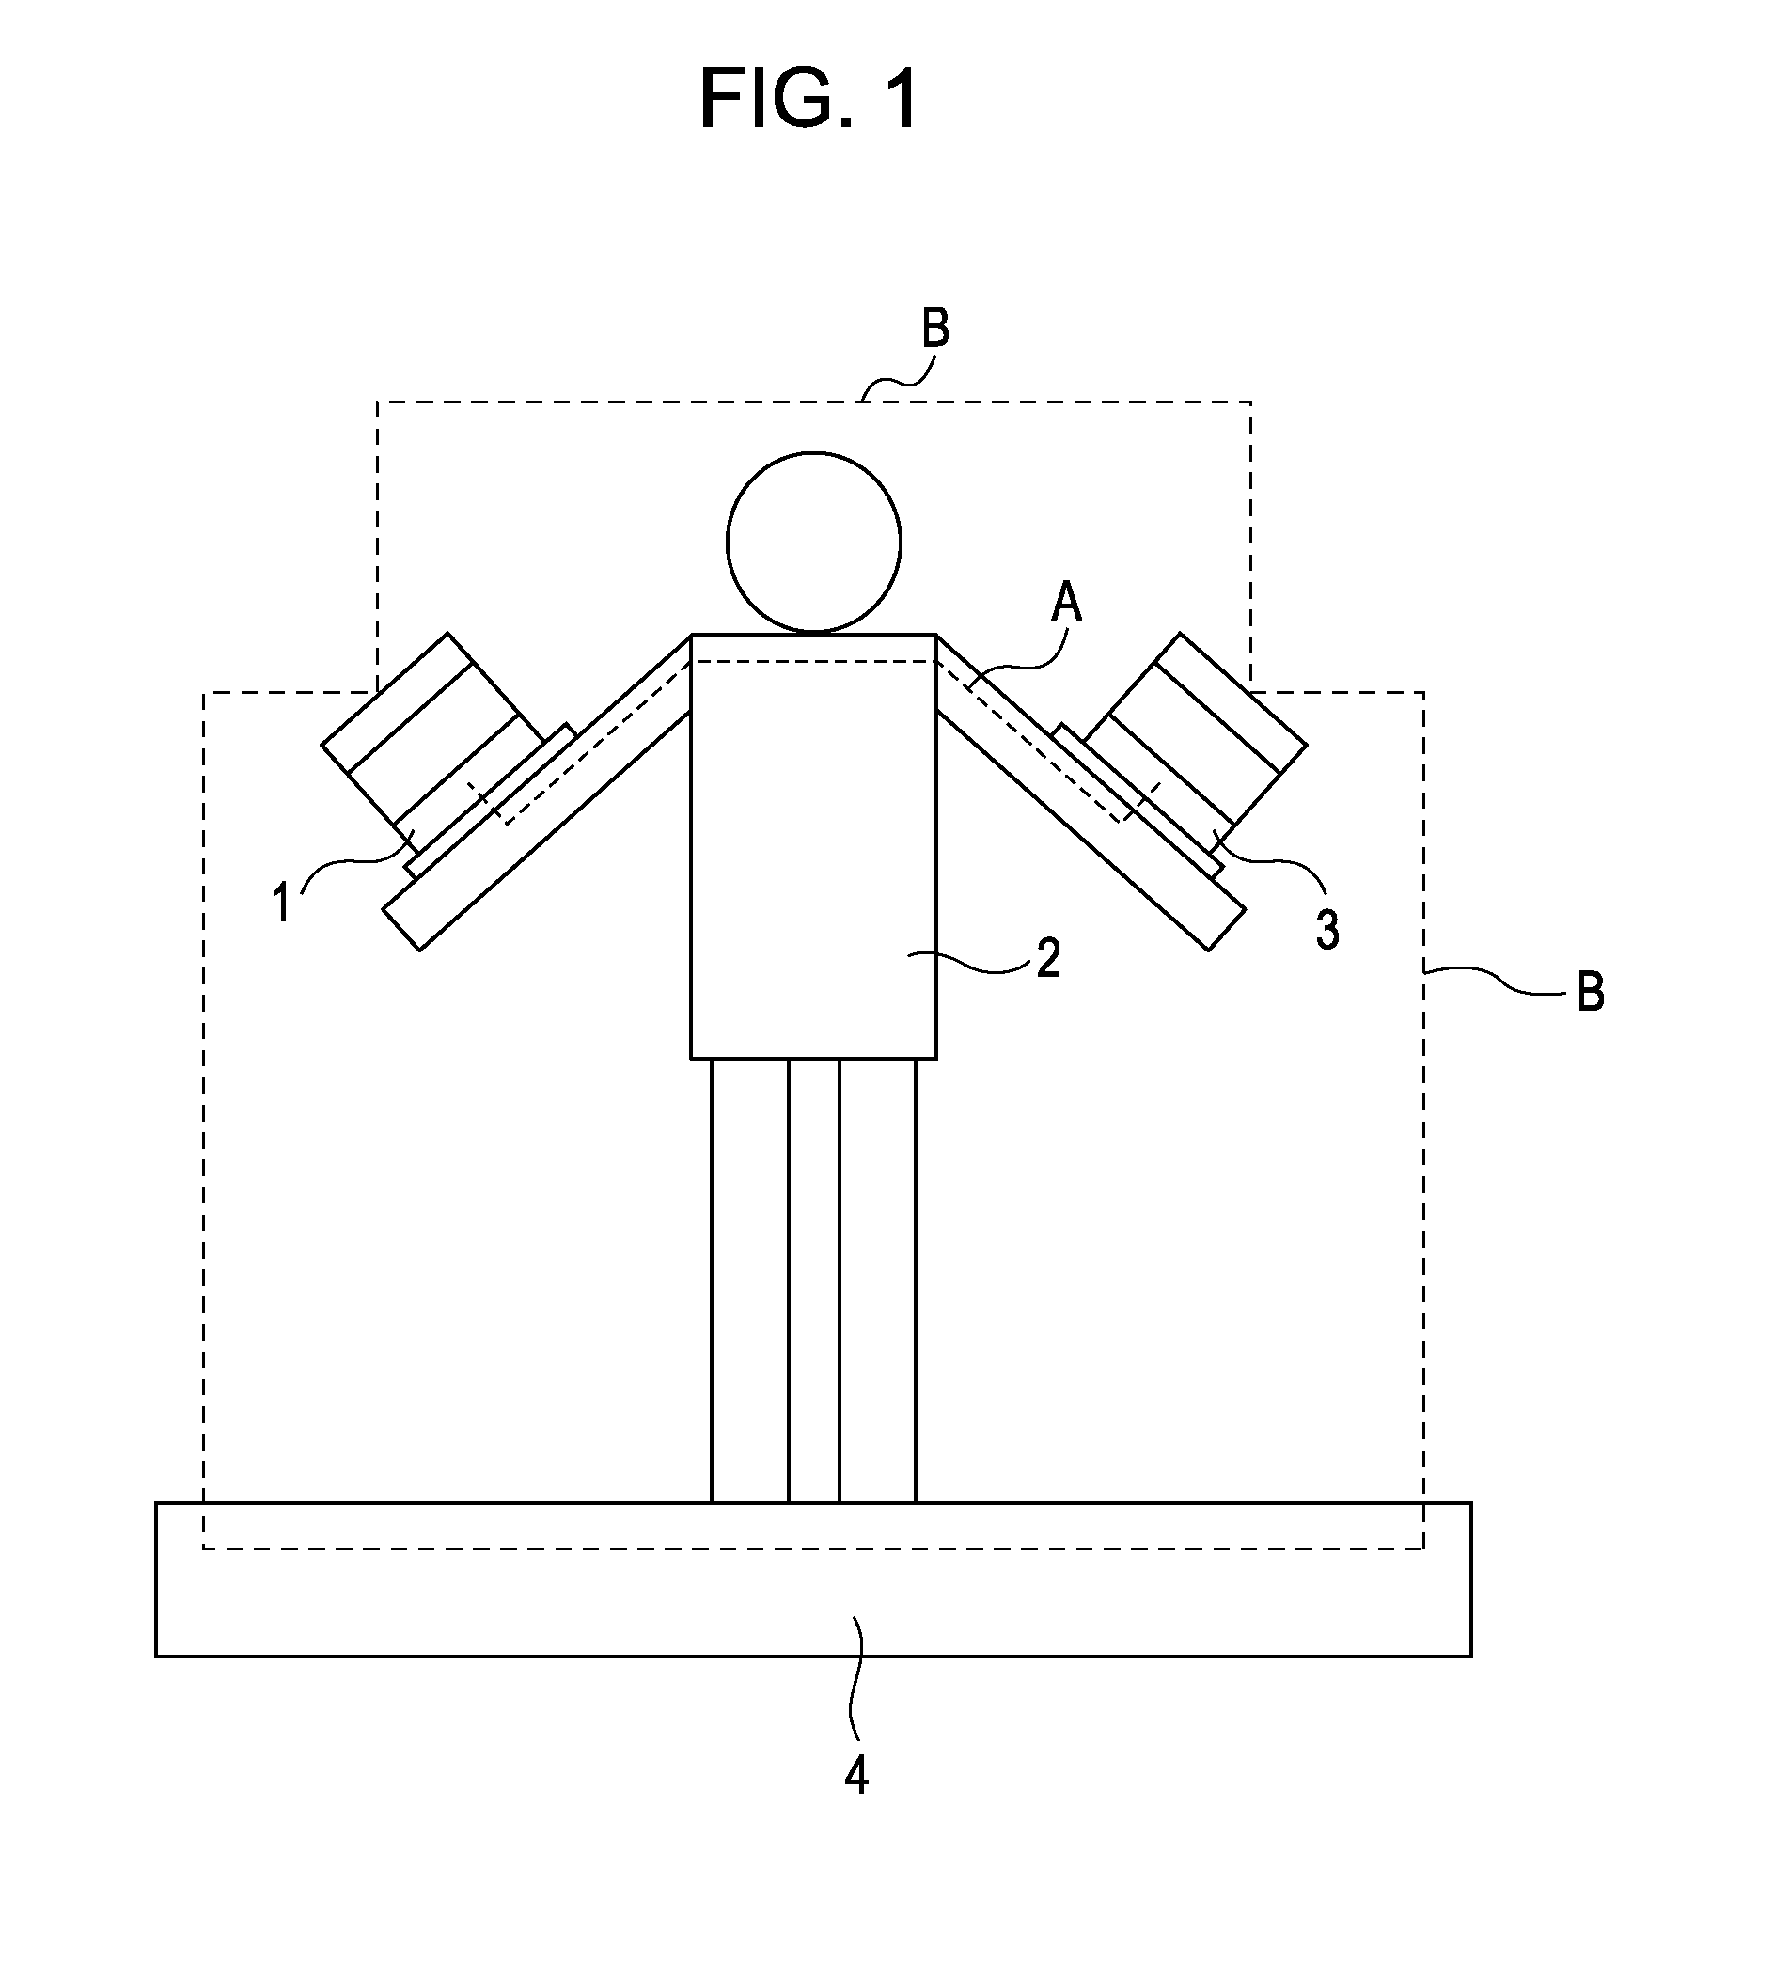 Electronic apparatus for electric field communication